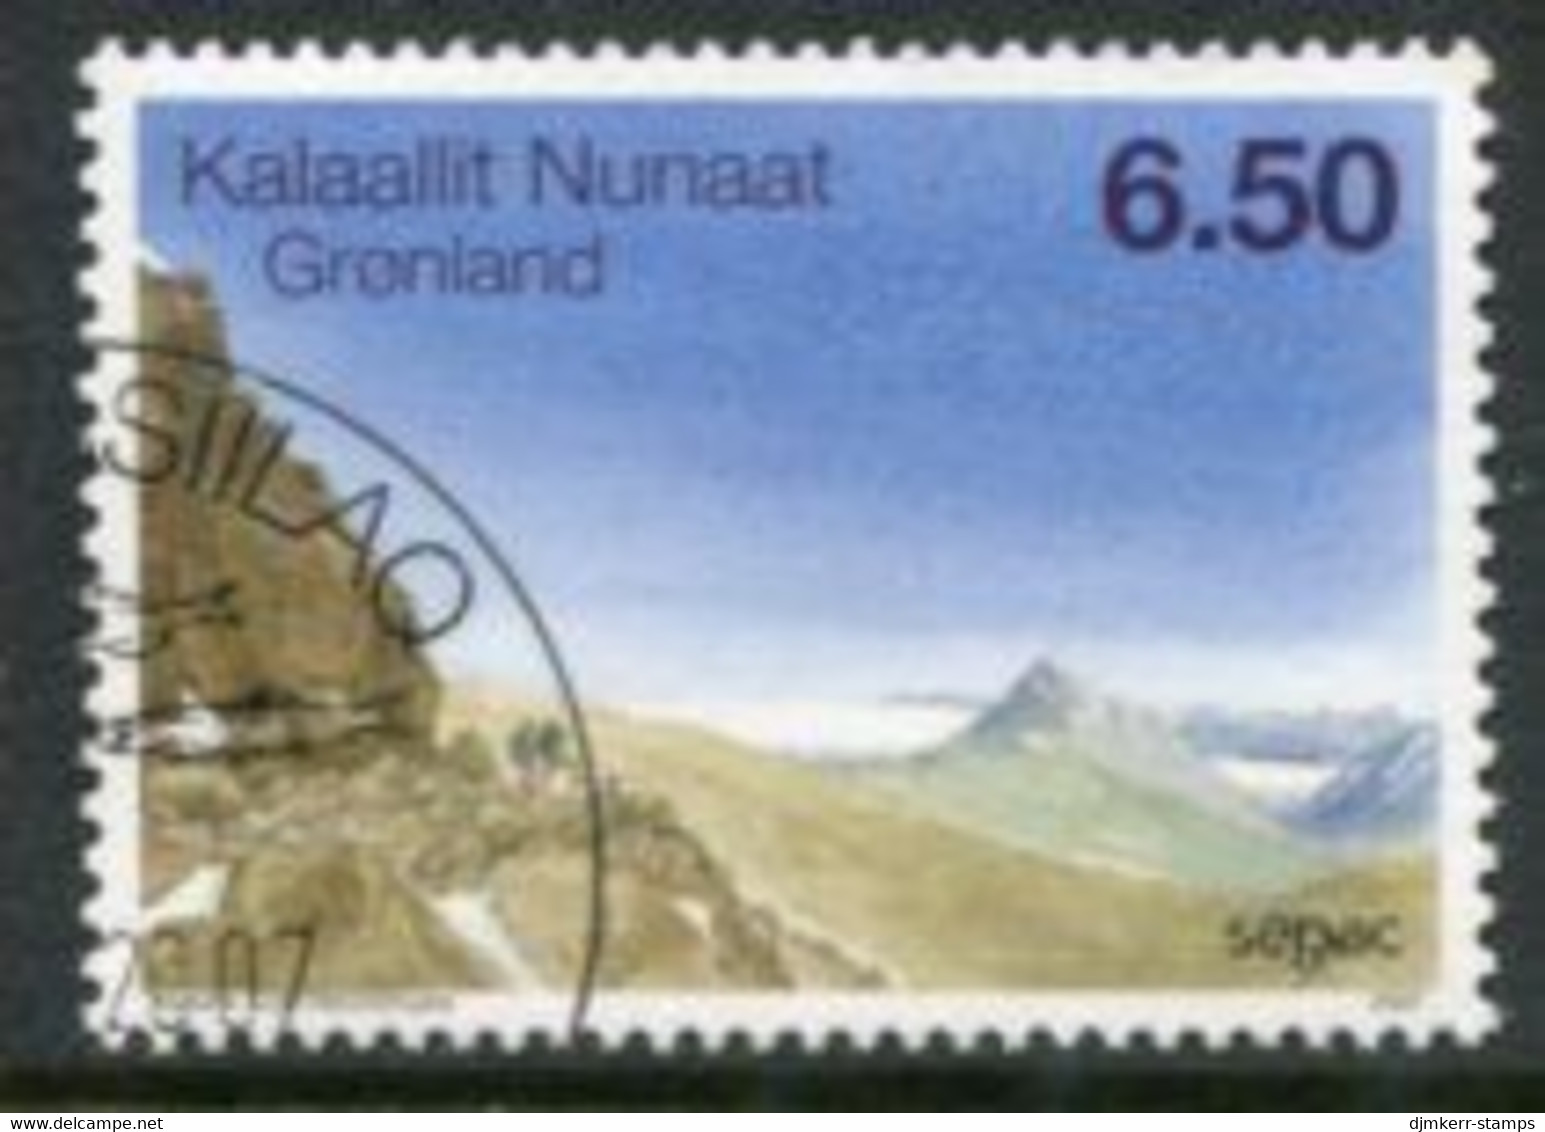 GREENLAND 2007 SEPAC: Landscape Used   Michel 492 - Used Stamps